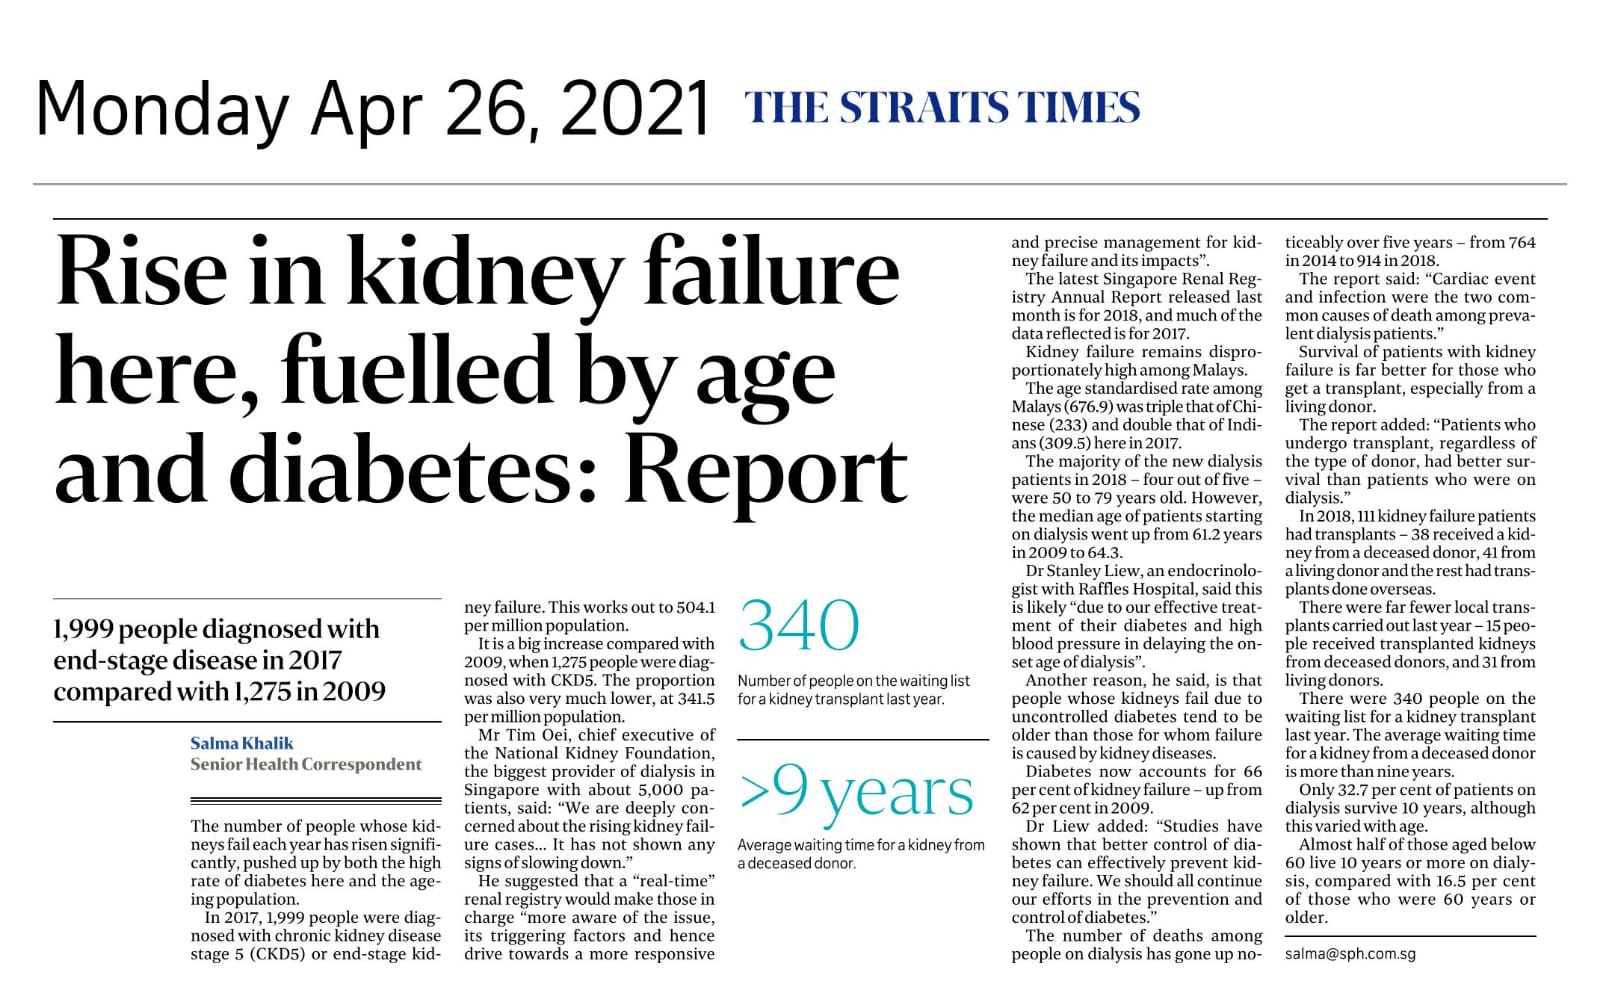 Rise in kidney failure here, fuelled by age and diabetes: Report - Published in The Straits Times Apr 26, 2021